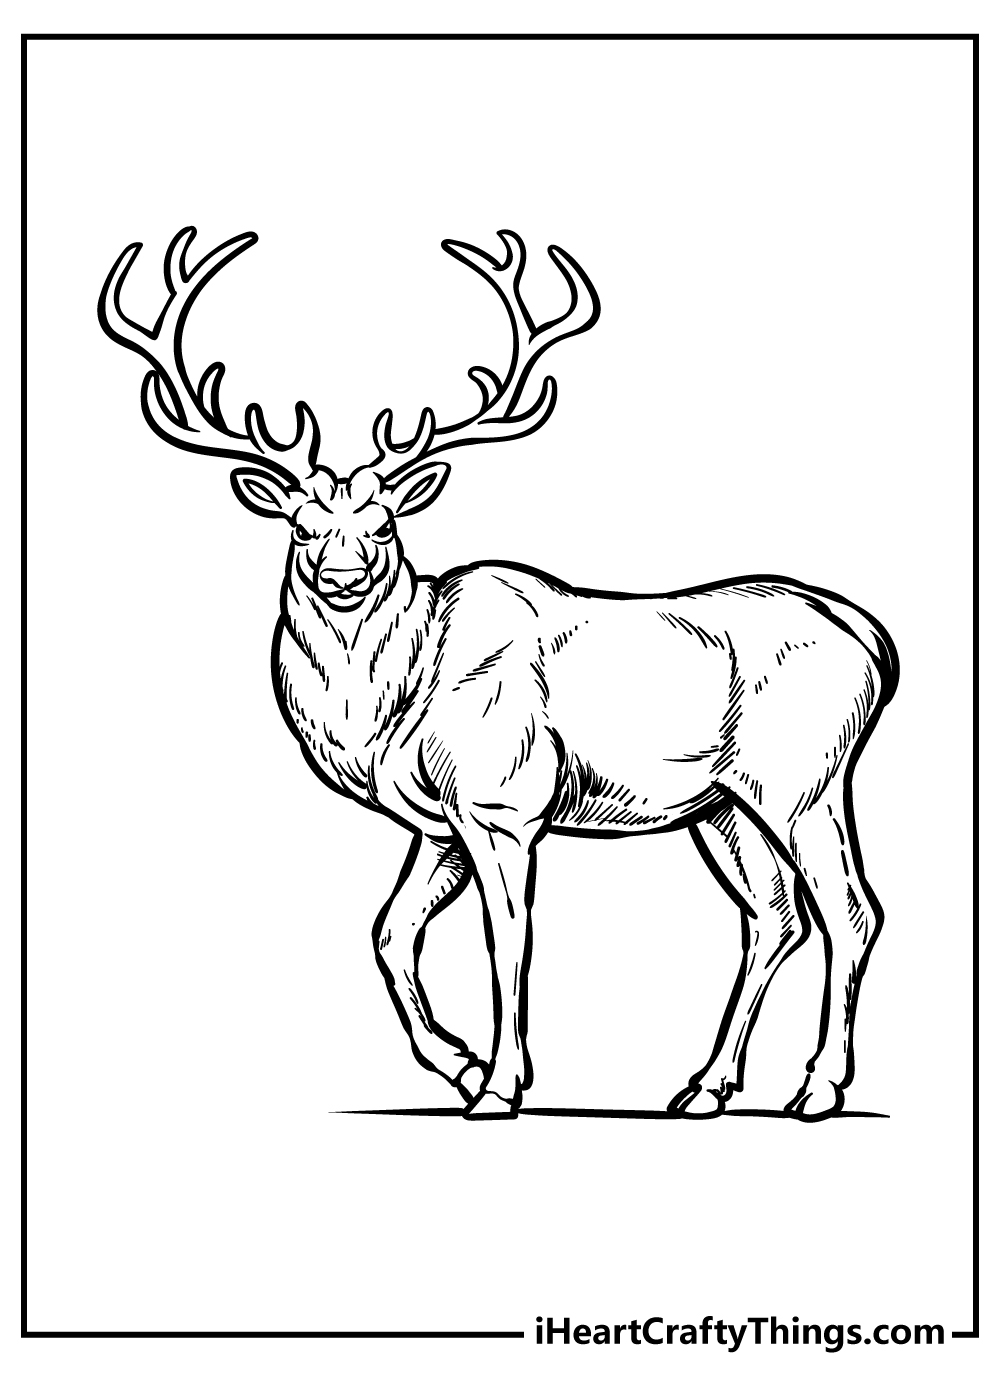 Zoo animals coloring pages free printables